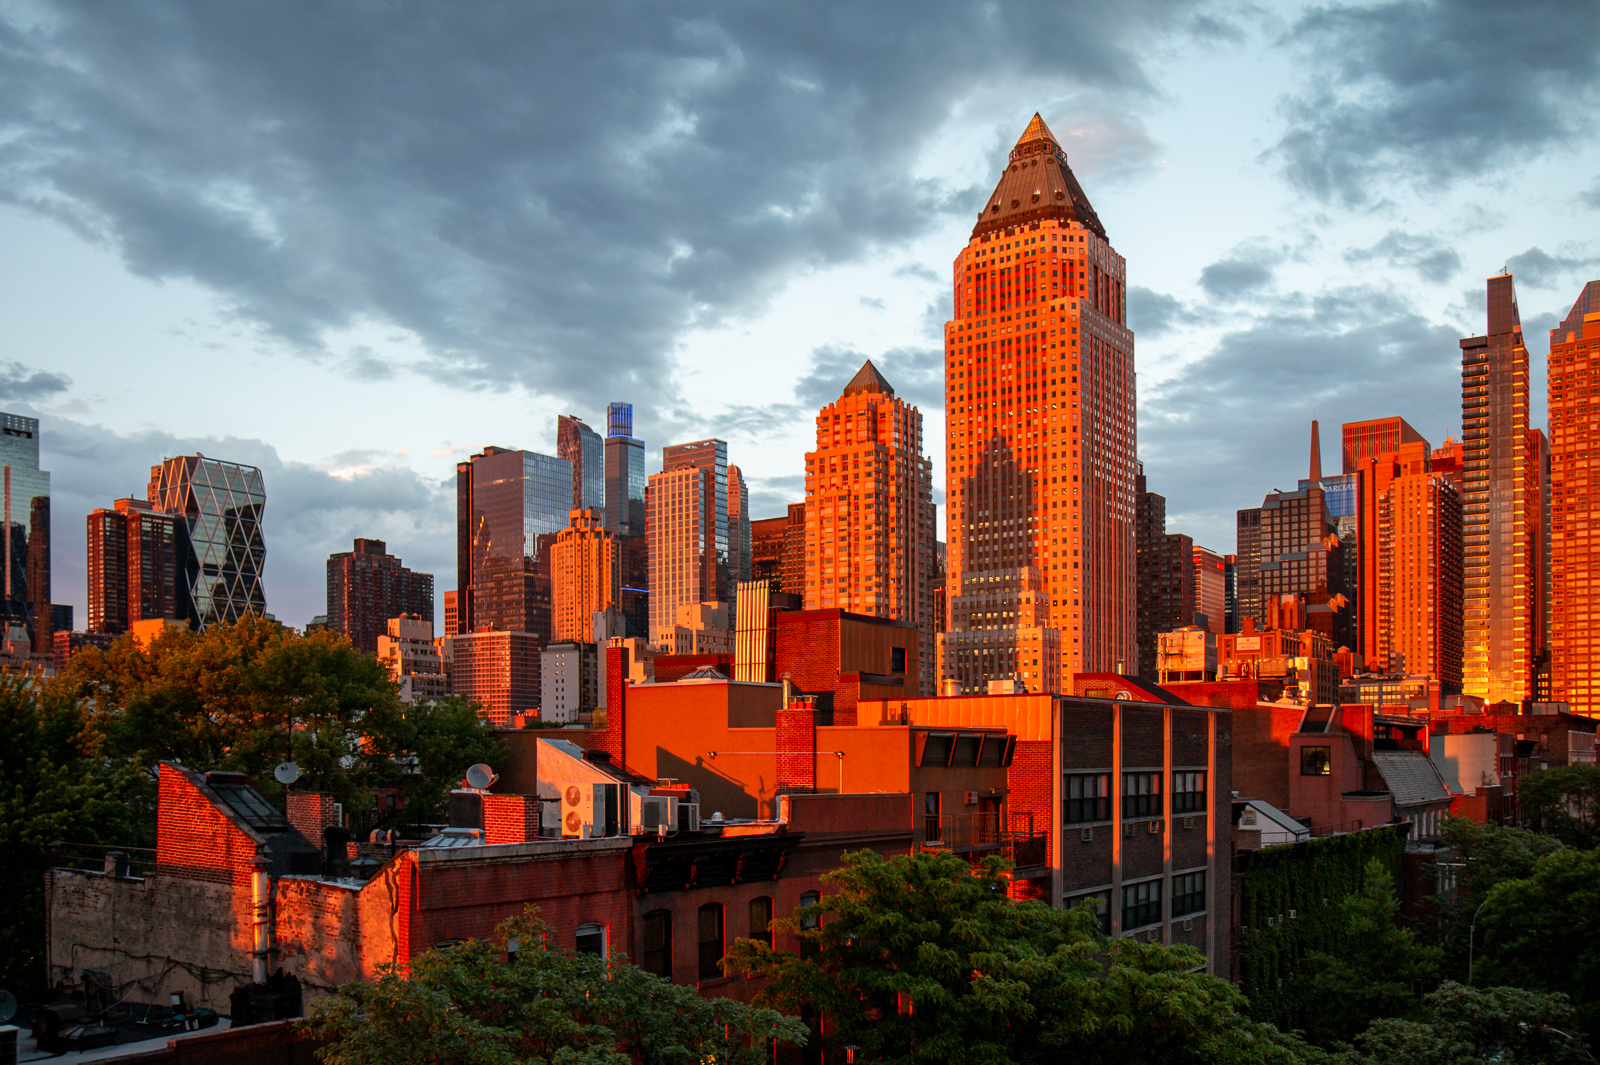 new york city, sunset, midtown west, westside, tall buildings, cityscape, apartment buildings, sky, clouds, orange hues.